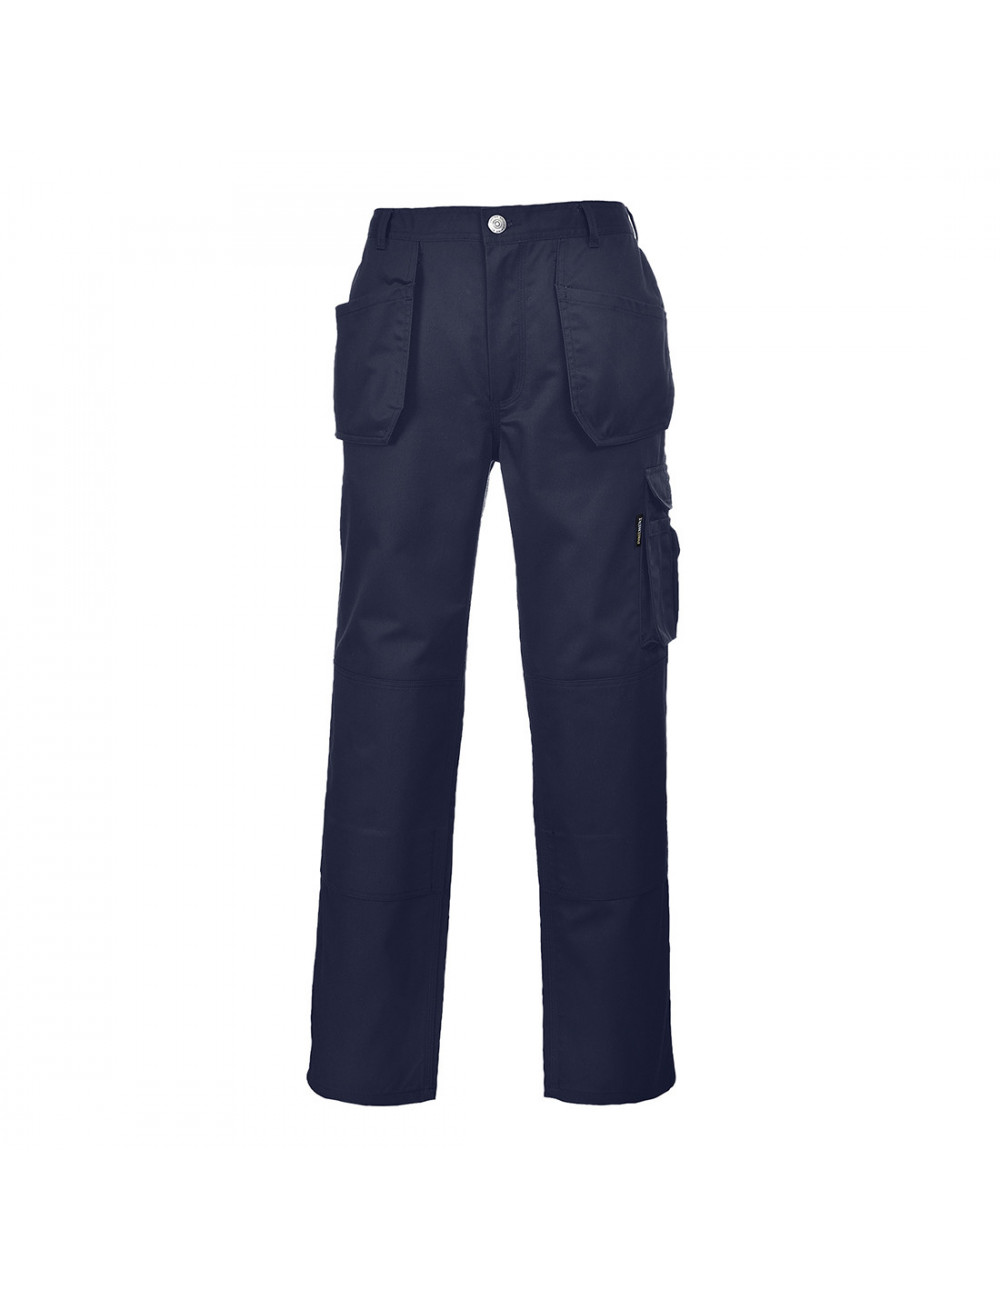 Trousers with holster pockets slate navy tall Portwest